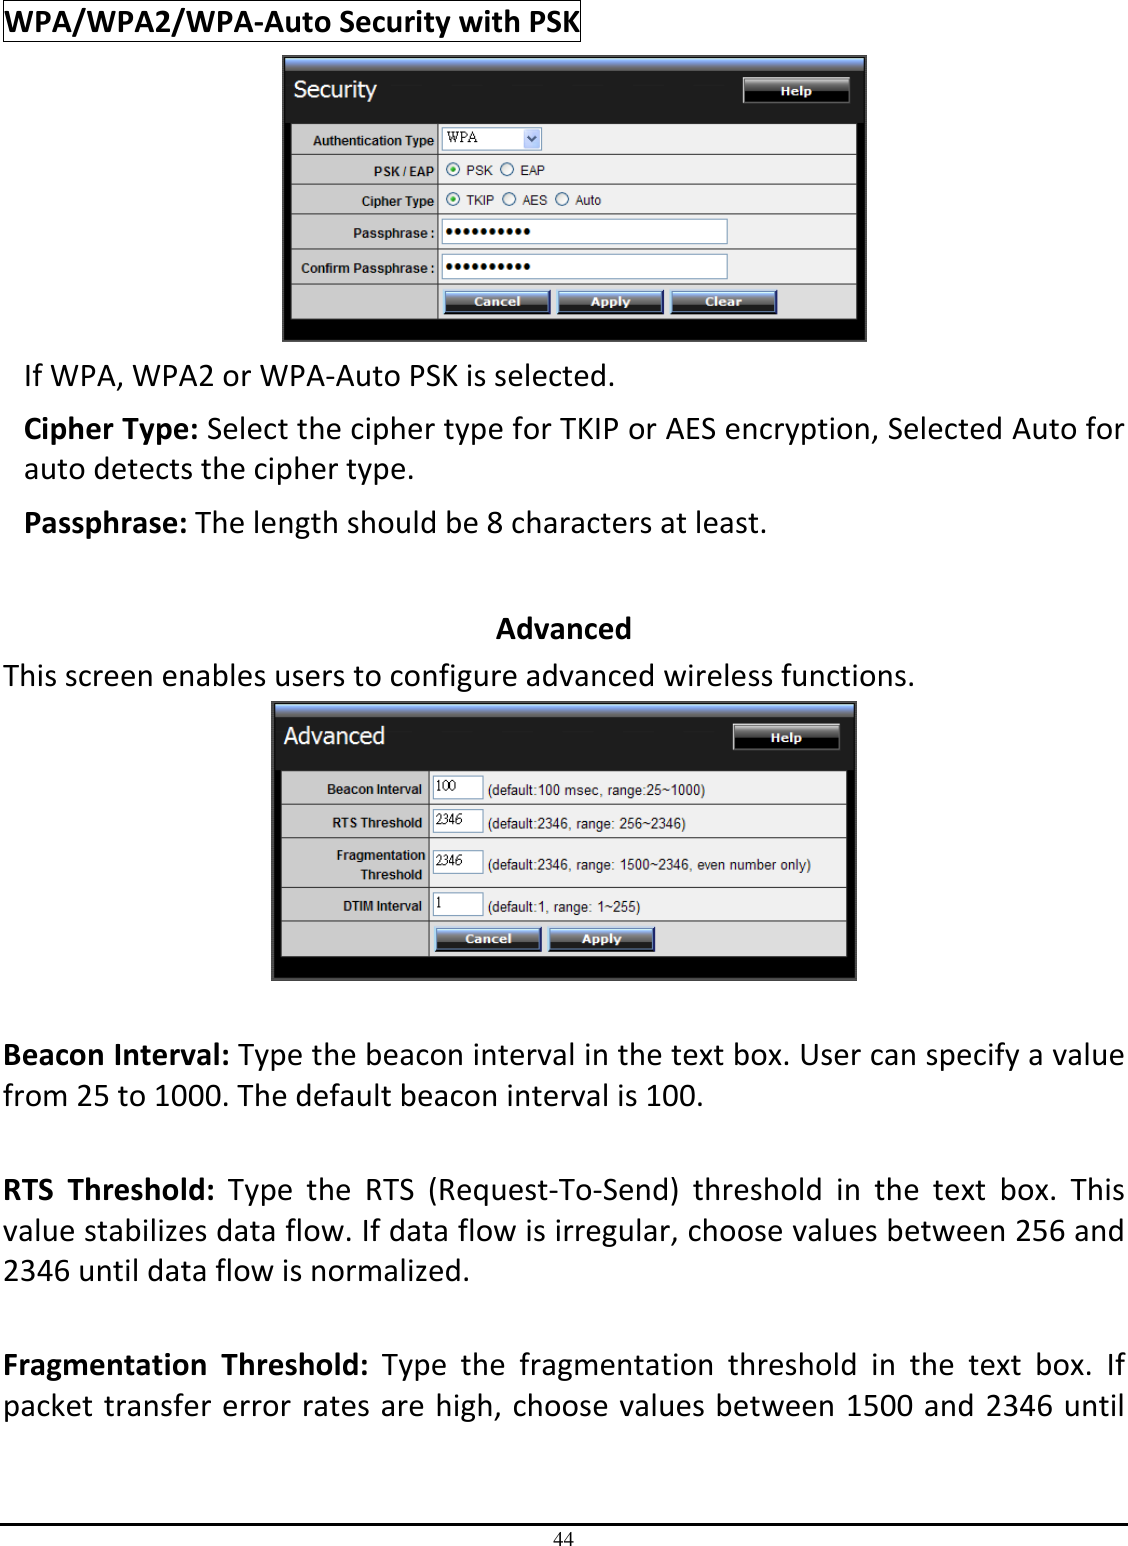 44 WPA/WPA2/WPA-Auto Security with PSK  If WPA, WPA2 or WPA-Auto PSK is selected. Cipher Type: Select the cipher type for TKIP or AES encryption, Selected Auto for auto detects the cipher type.  Passphrase: The length should be 8 characters at least.   Advanced This screen enables users to configure advanced wireless functions.   Beacon Interval: Type the beacon interval in the text box. User can specify a value from 25 to 1000. The default beacon interval is 100.  RTS  Threshold:  Type  the  RTS  (Request-To-Send)  threshold  in  the  text  box.  This value stabilizes data flow. If data flow is irregular, choose values between 256 and 2346 until data flow is normalized.  Fragmentation  Threshold:  Type  the  fragmentation  threshold  in  the  text  box.  If packet transfer error rates are high, choose values between 1500 and 2346 until 